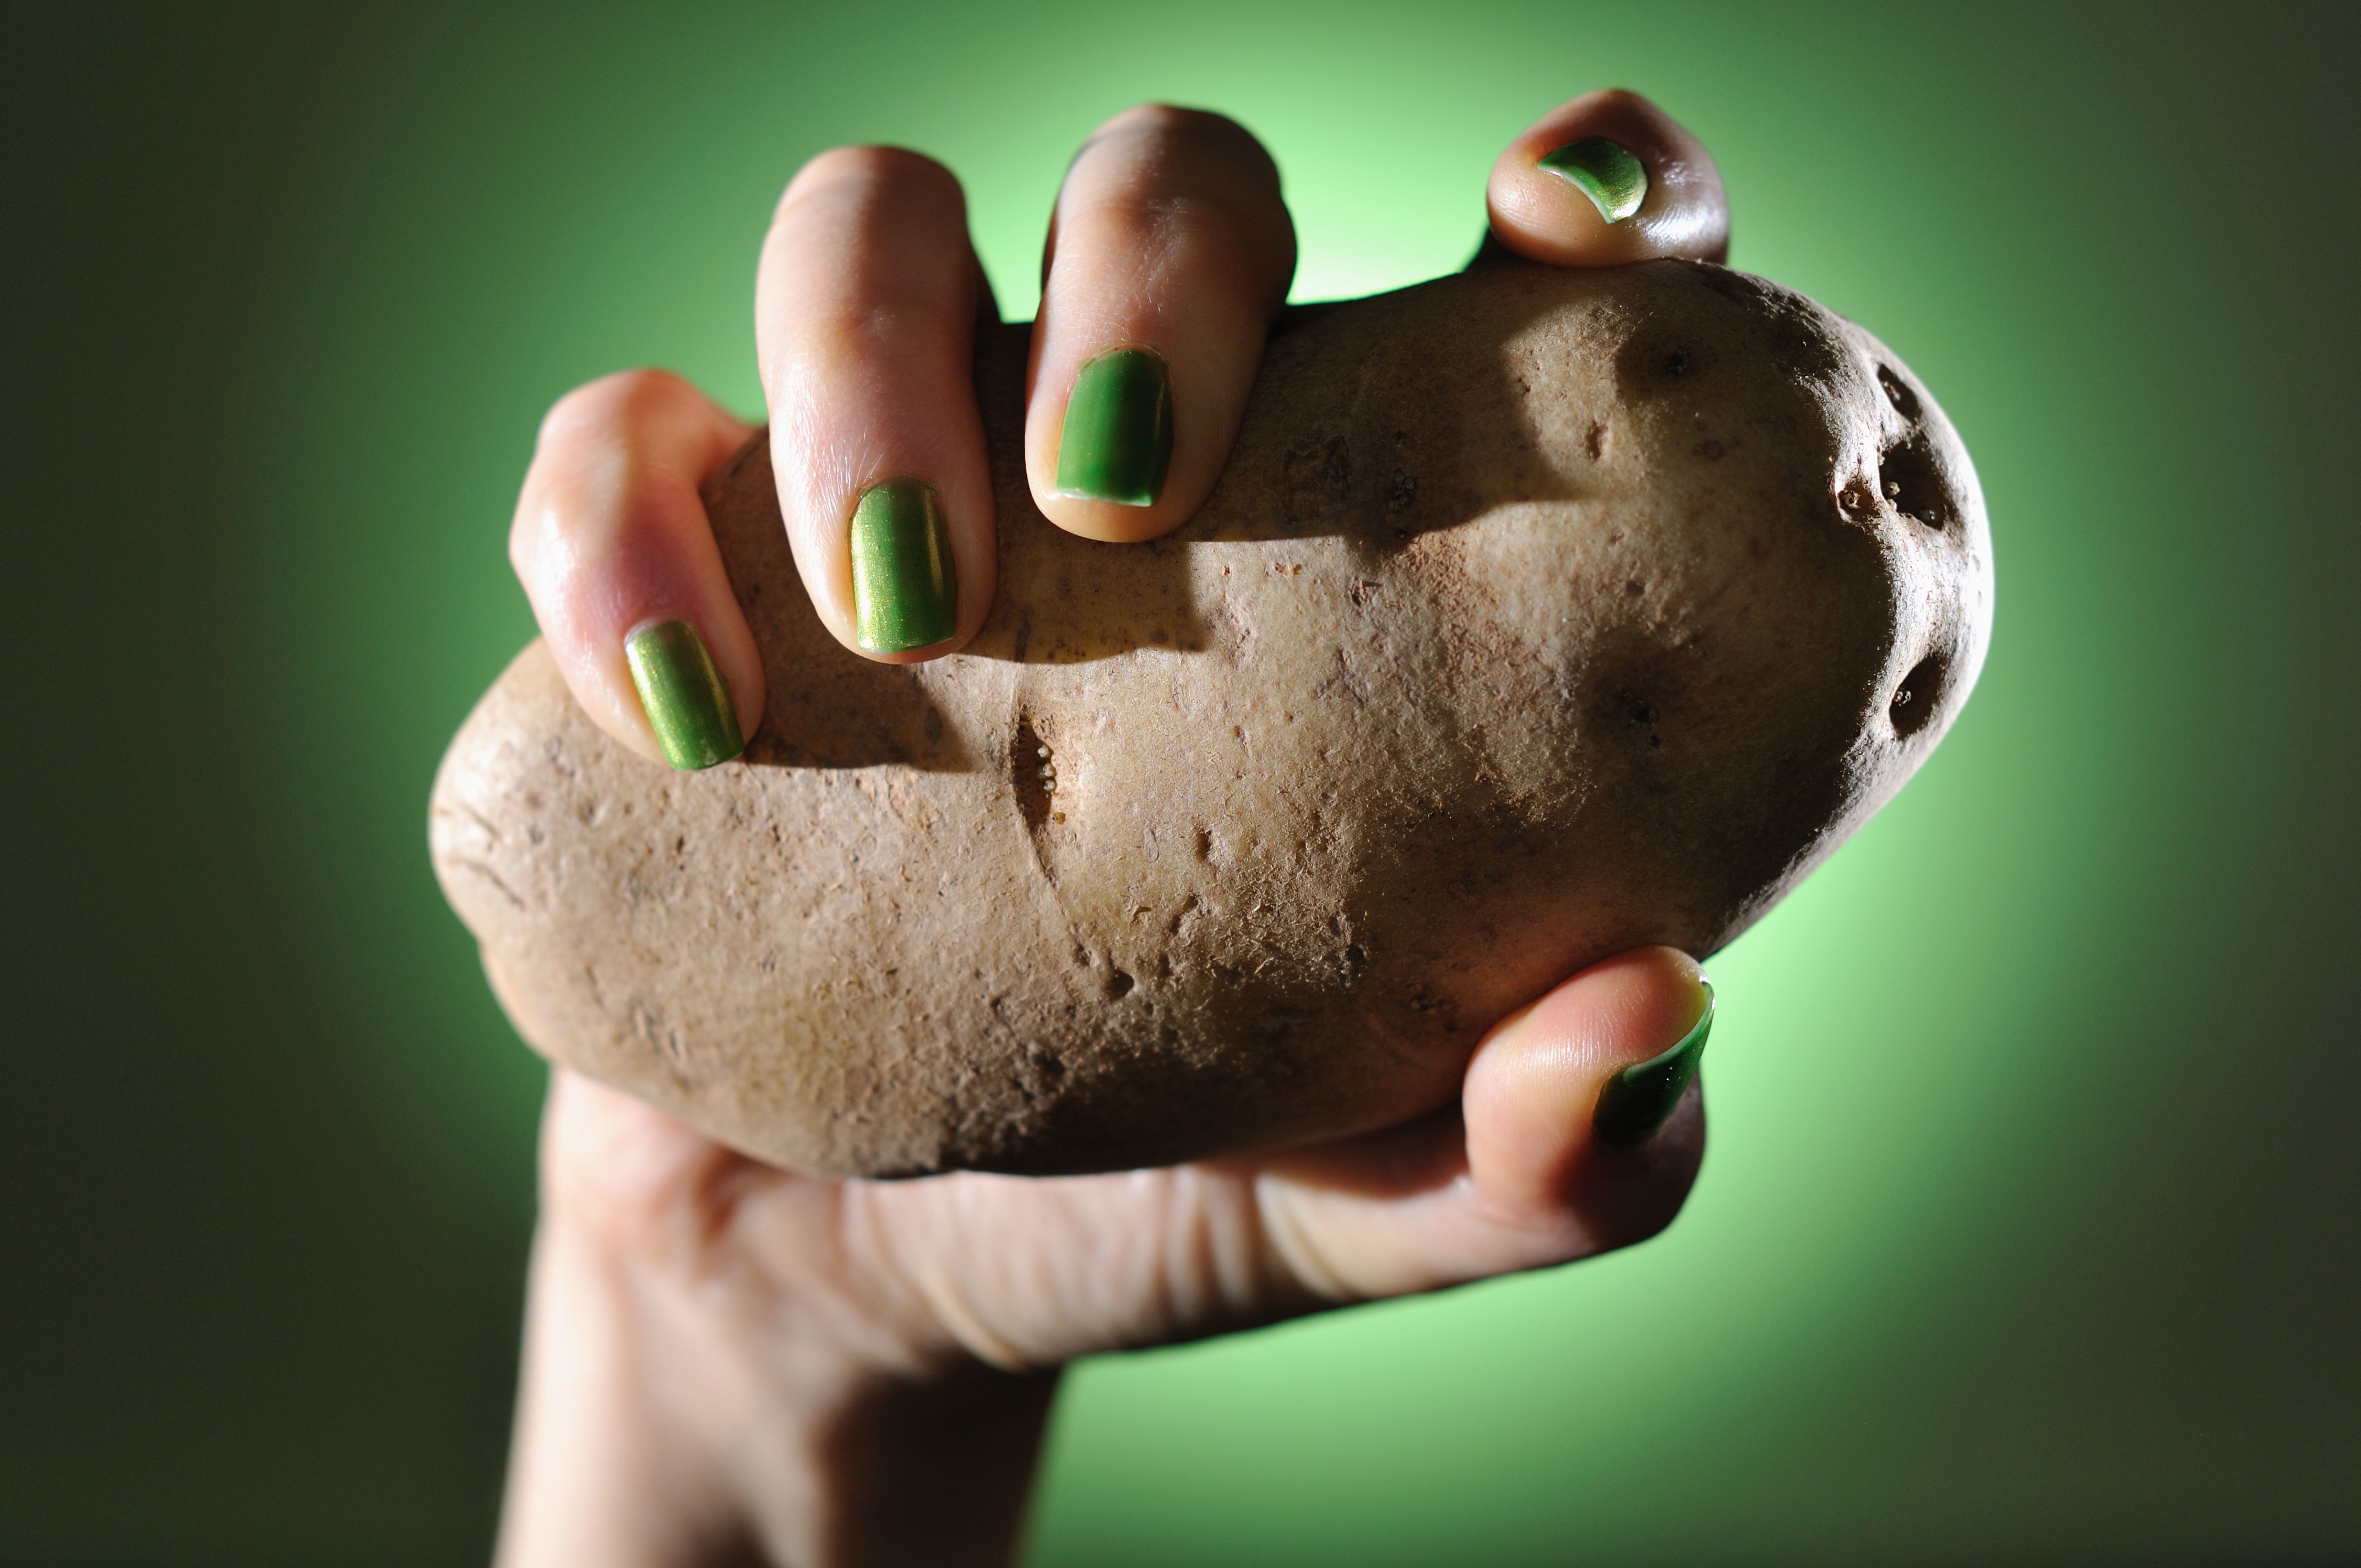 How Poisonous Are Green Potatoes? Solanine Poisoning